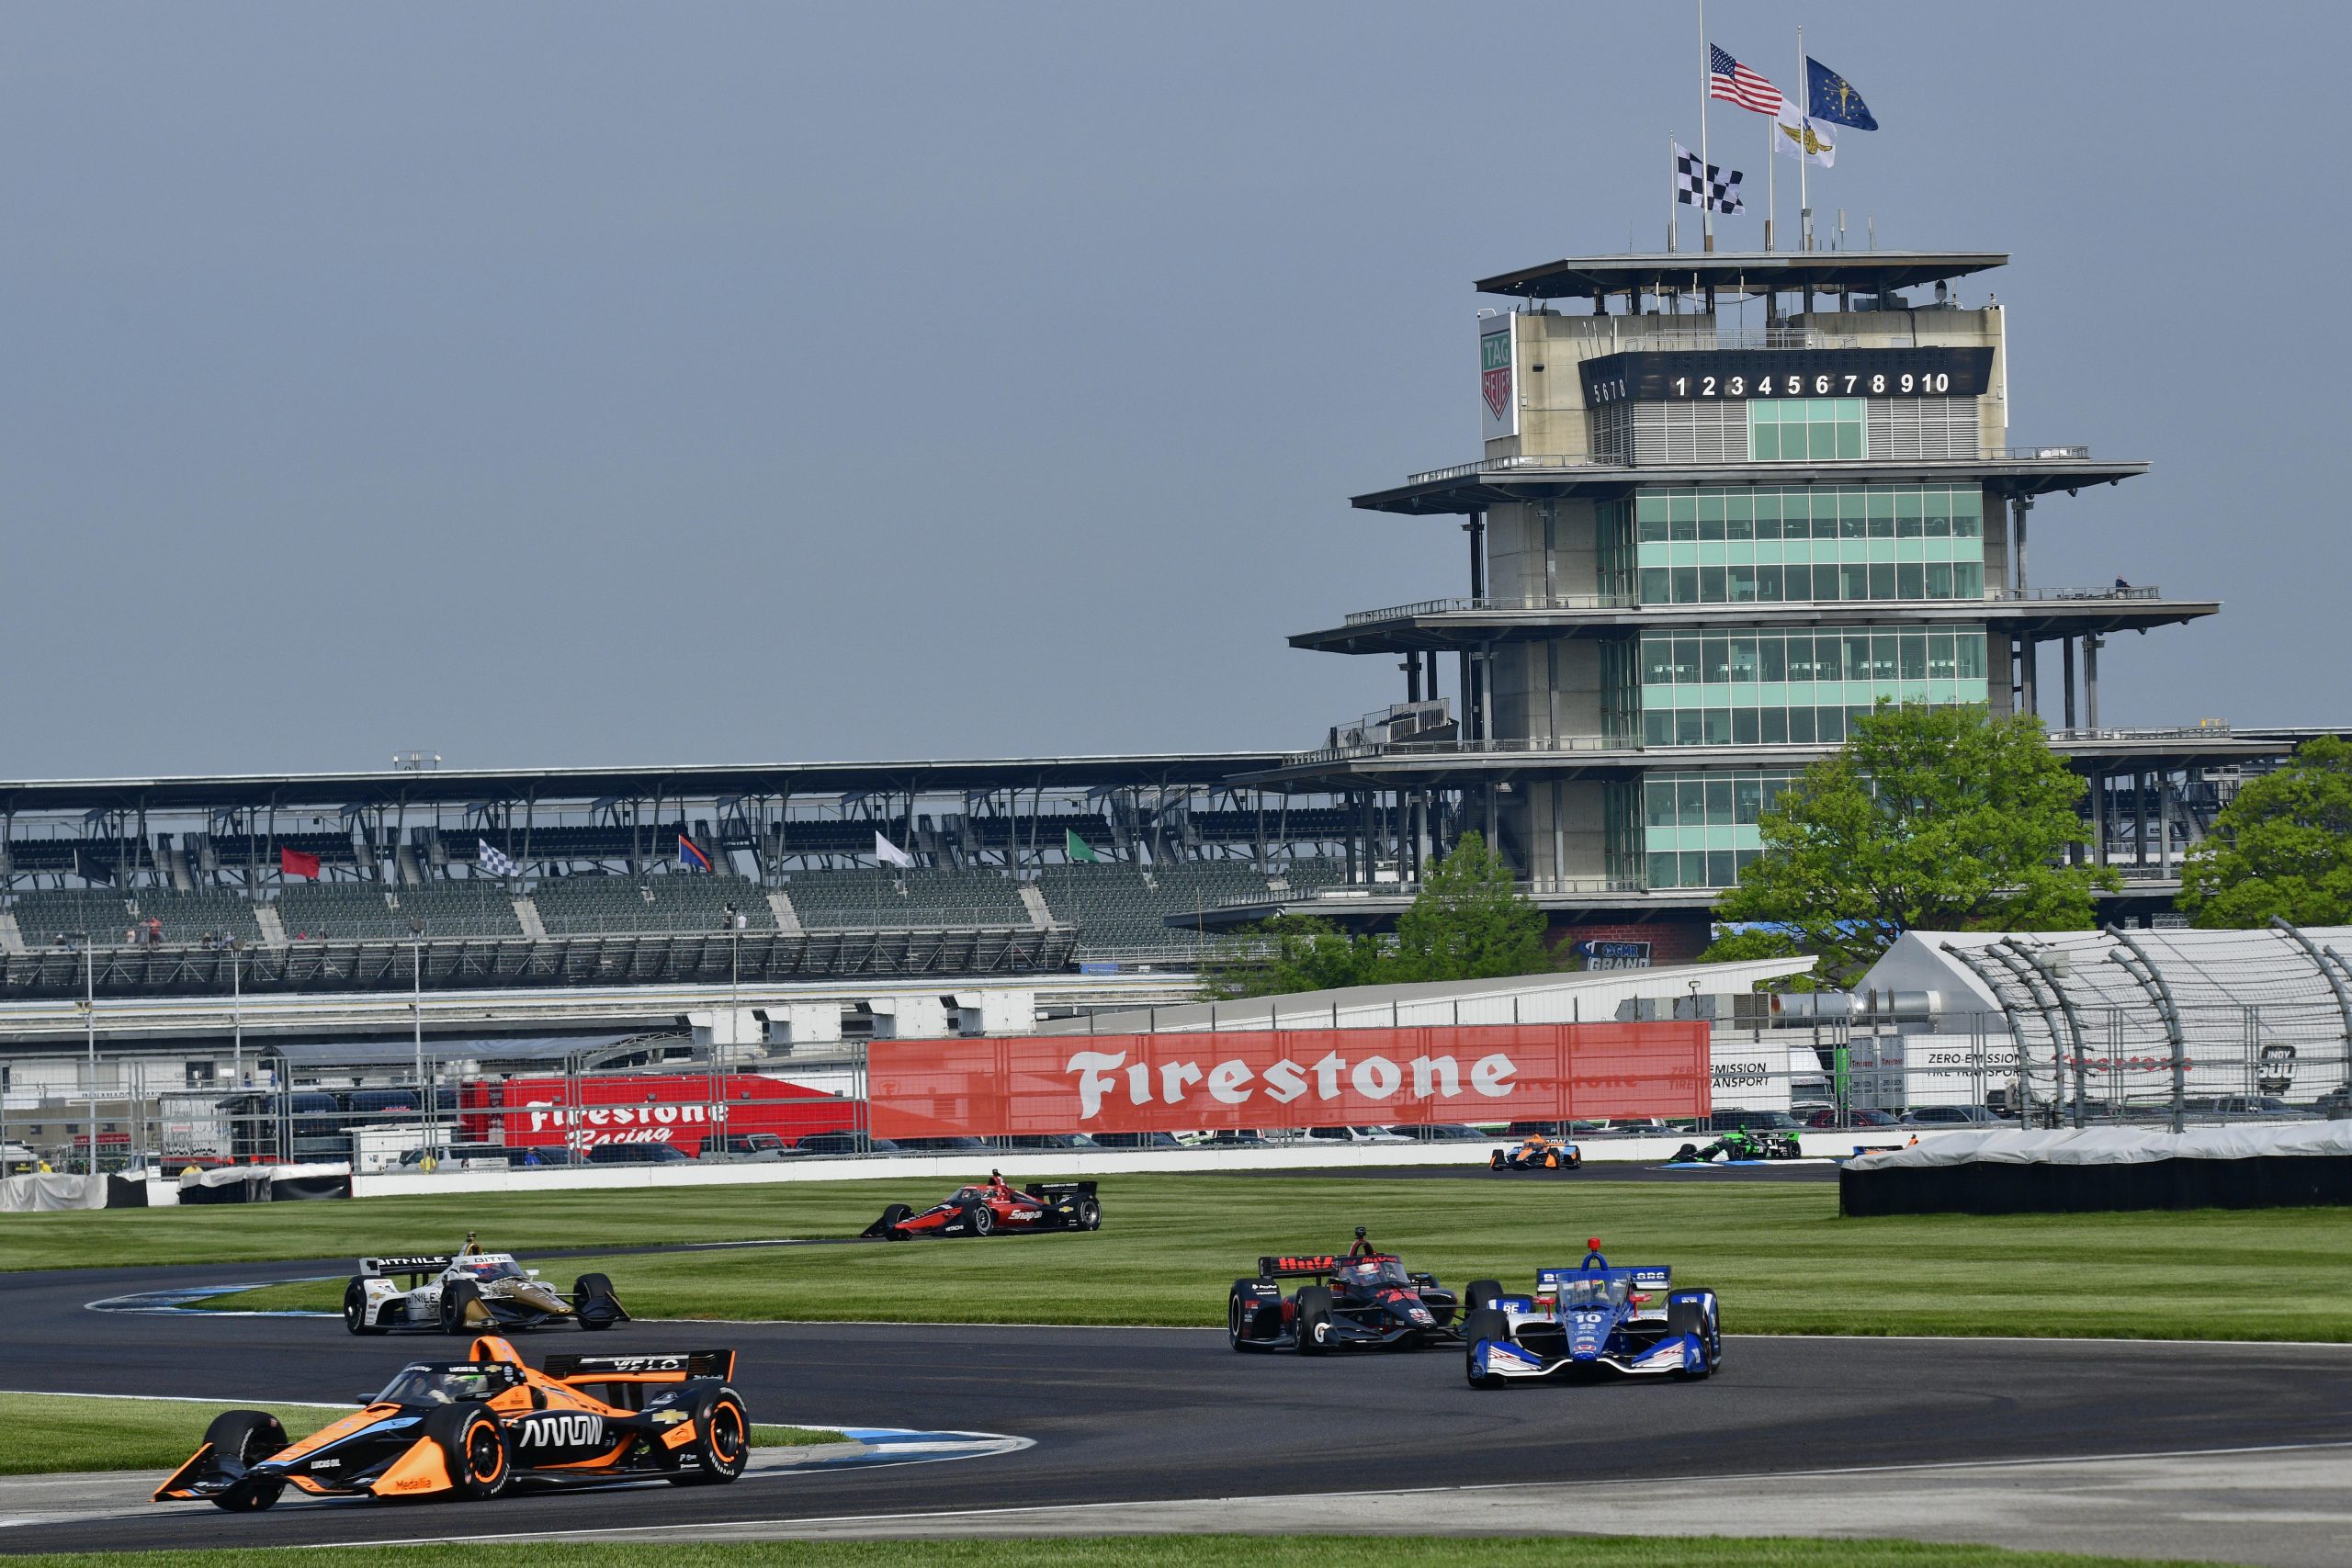 The IndyCar field during Practice 2 for the GMR Grand Prix at Indianapolis Motor Speedway. (Walt Kuhn/Penske Entertainment)